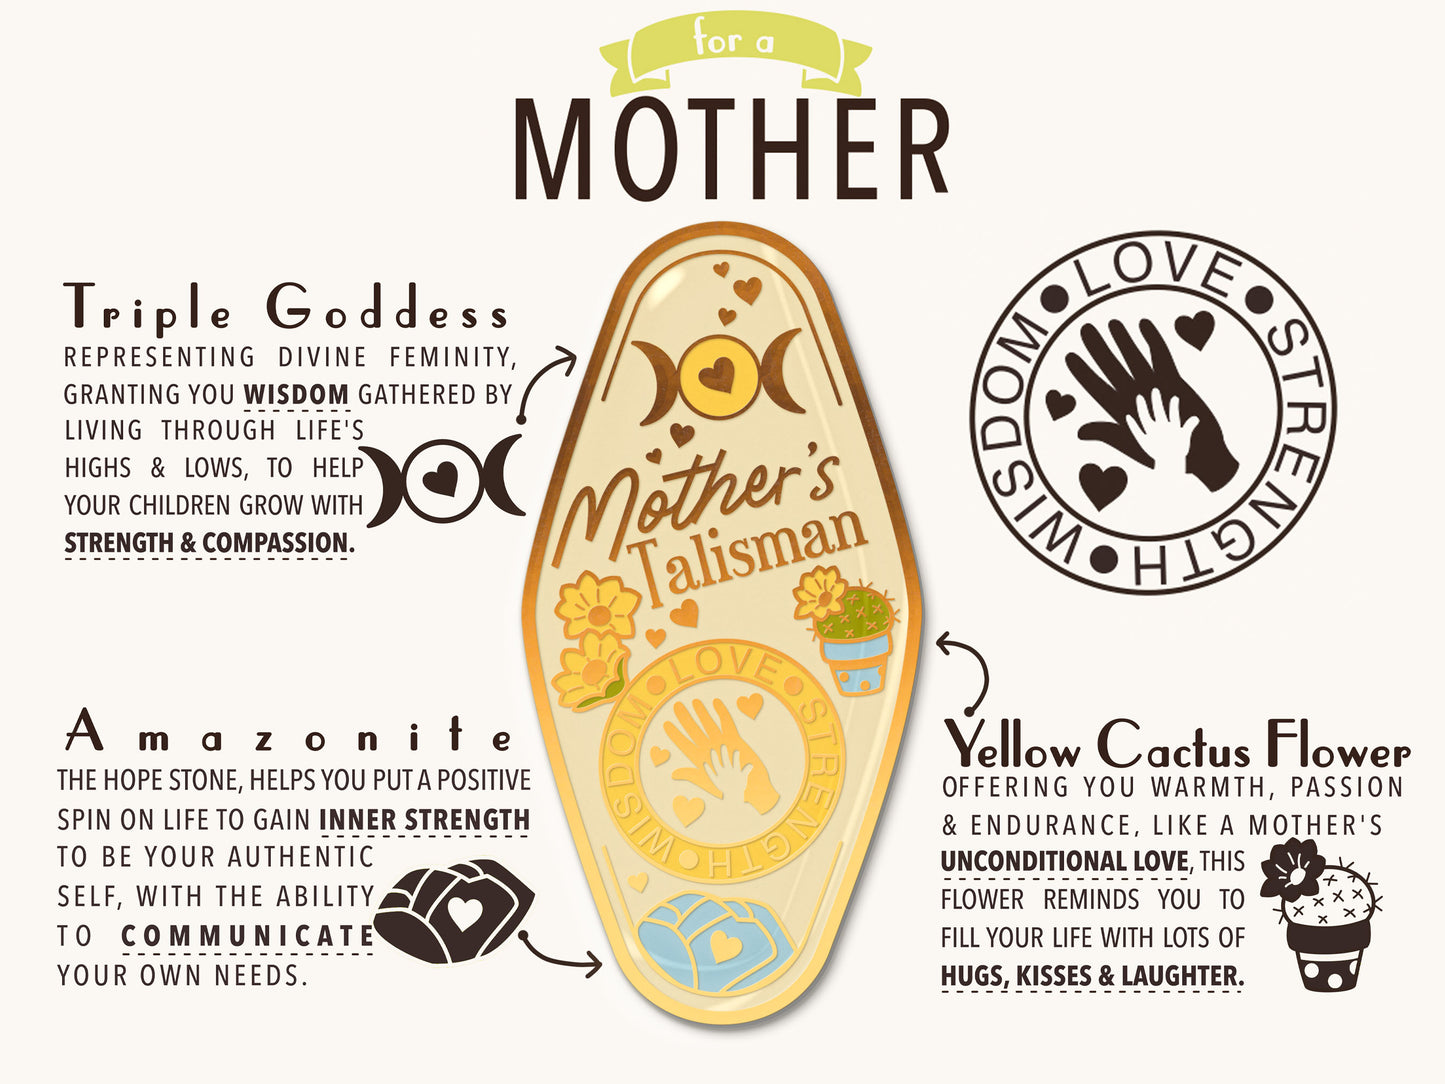 A illustrated diagram outline the symbolism of the different design elements of the for a Mother's Talisman pin. Information includes the meaning of the Triple Goddess, Amazonite and yellow cactus flower